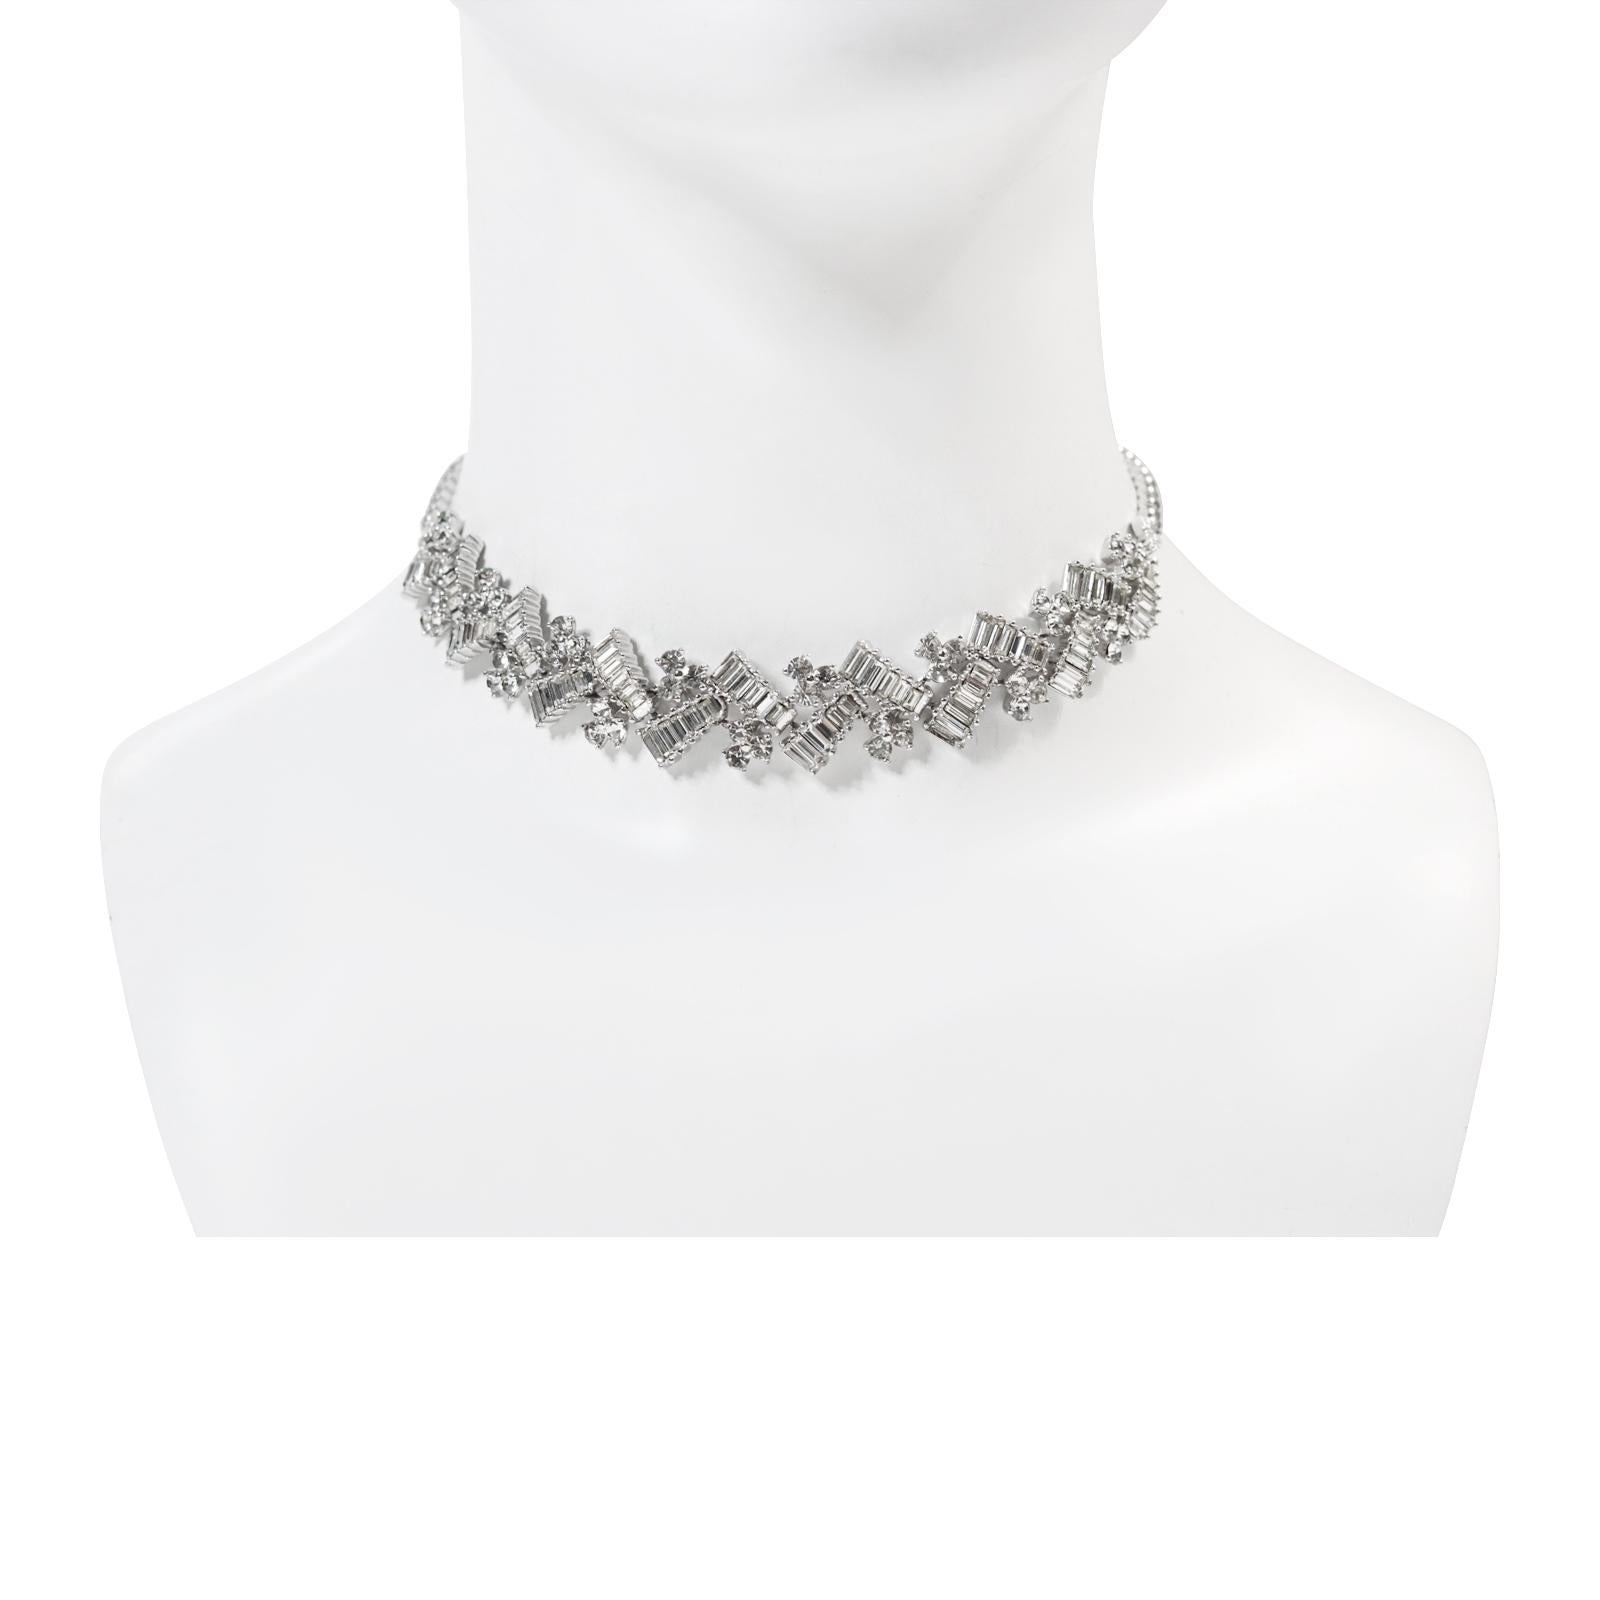 Vintage Pennino Baguette and Round  Art Deco Choker  Circa 1960s.  This is a gorgeous choker necklace from Pennino.  They made such magnificent items  which gives them the illusion of being fine jewelry. There are fewer and fewer of these gorgeous